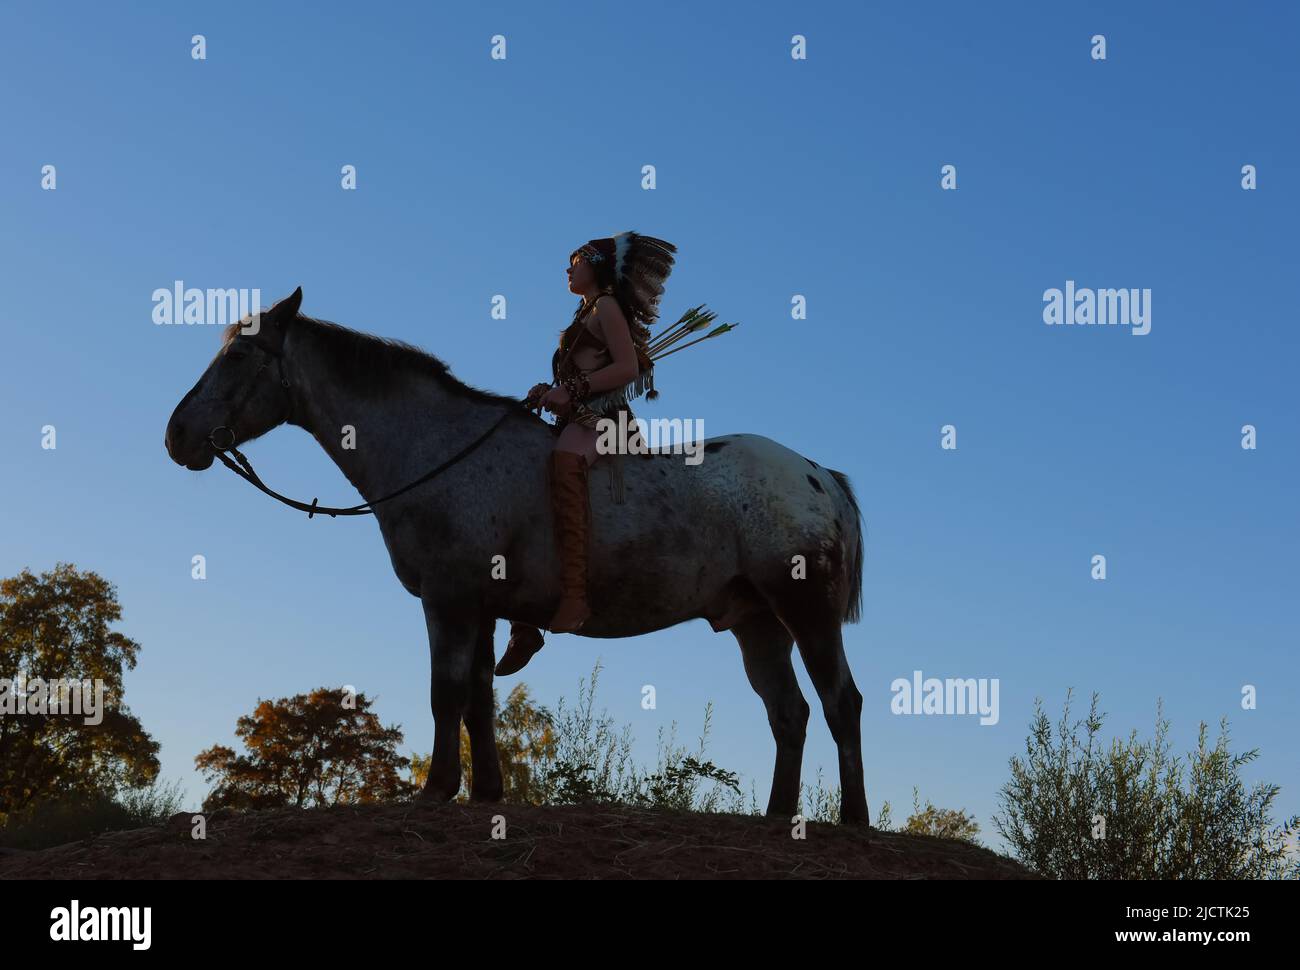 A young girl is seen at sunset as a Native American Indian.  She is seen together with her horse as the sun sets in the distance. Stock Photo